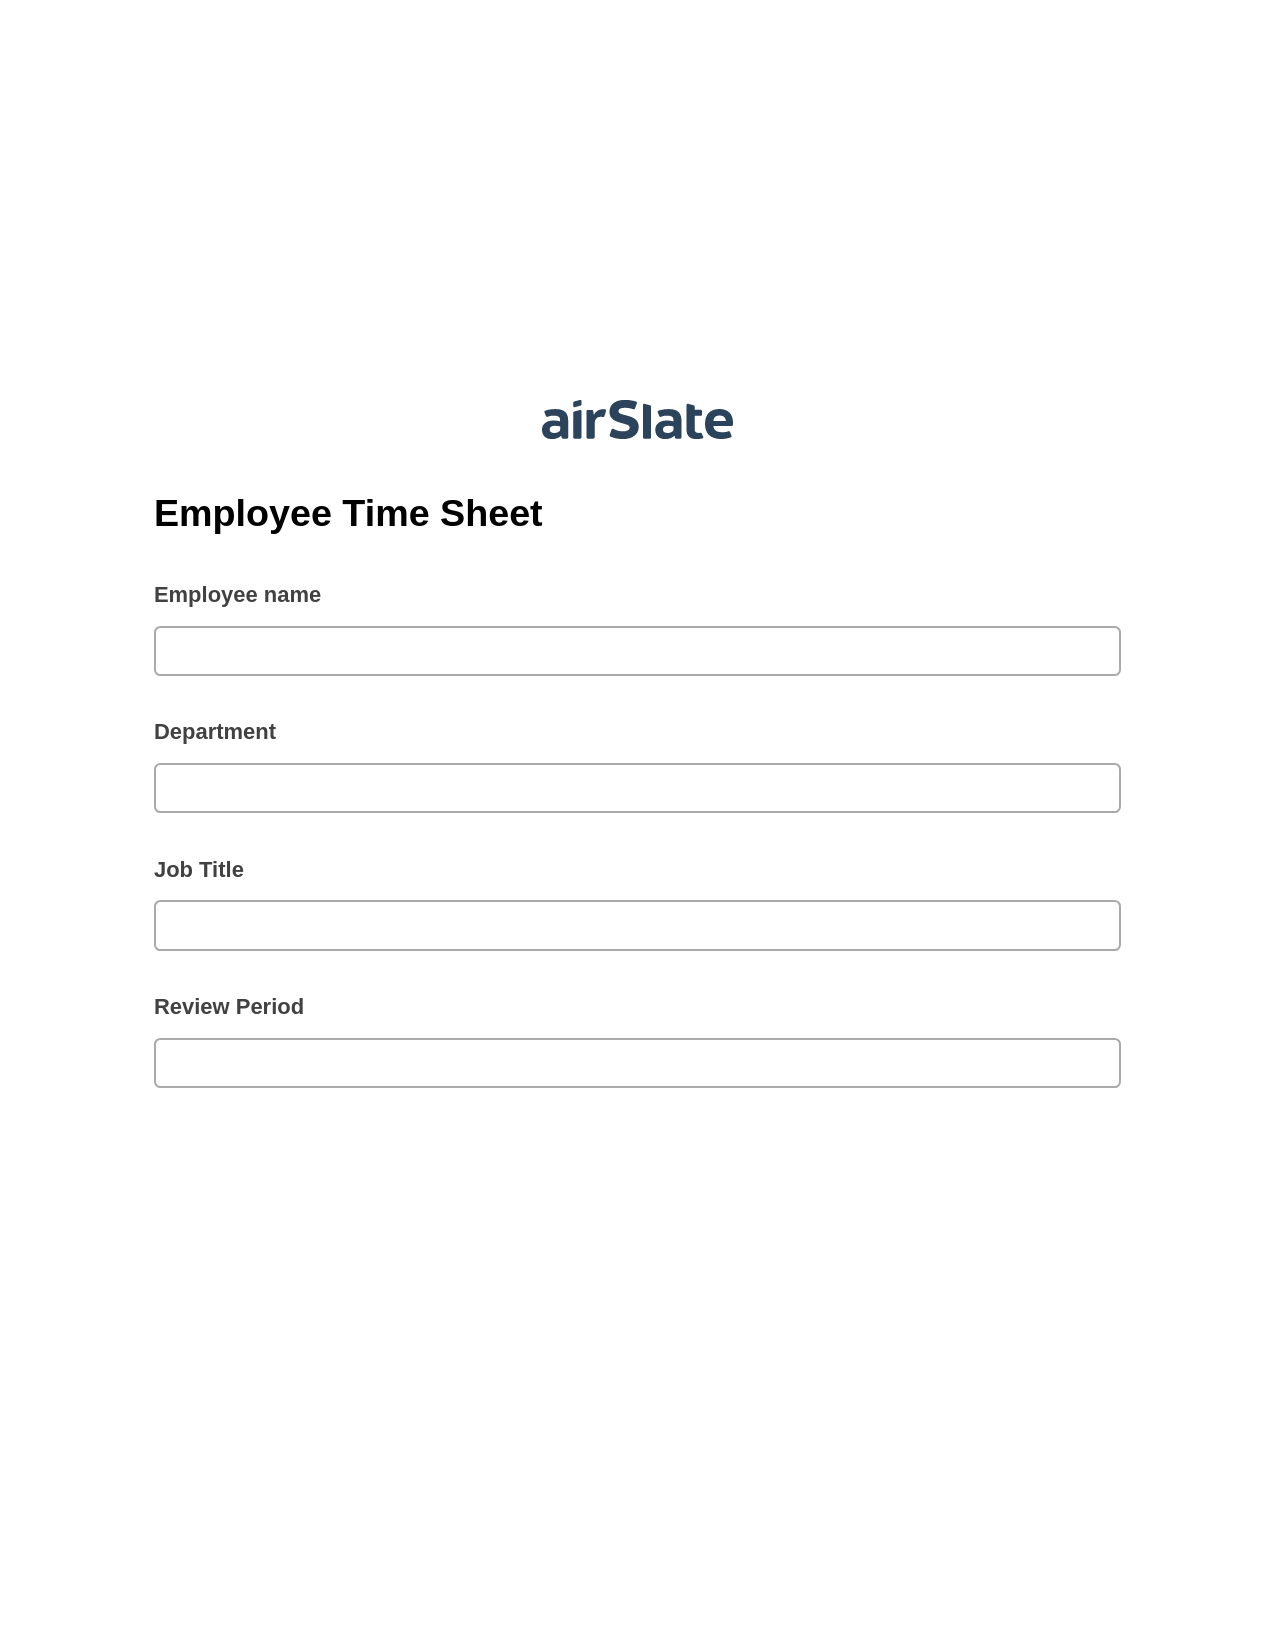 Multirole Employee Time Sheet Pre-fill Dropdowns from Excel Bot, Create slate addon, Archive to OneDrive Bot